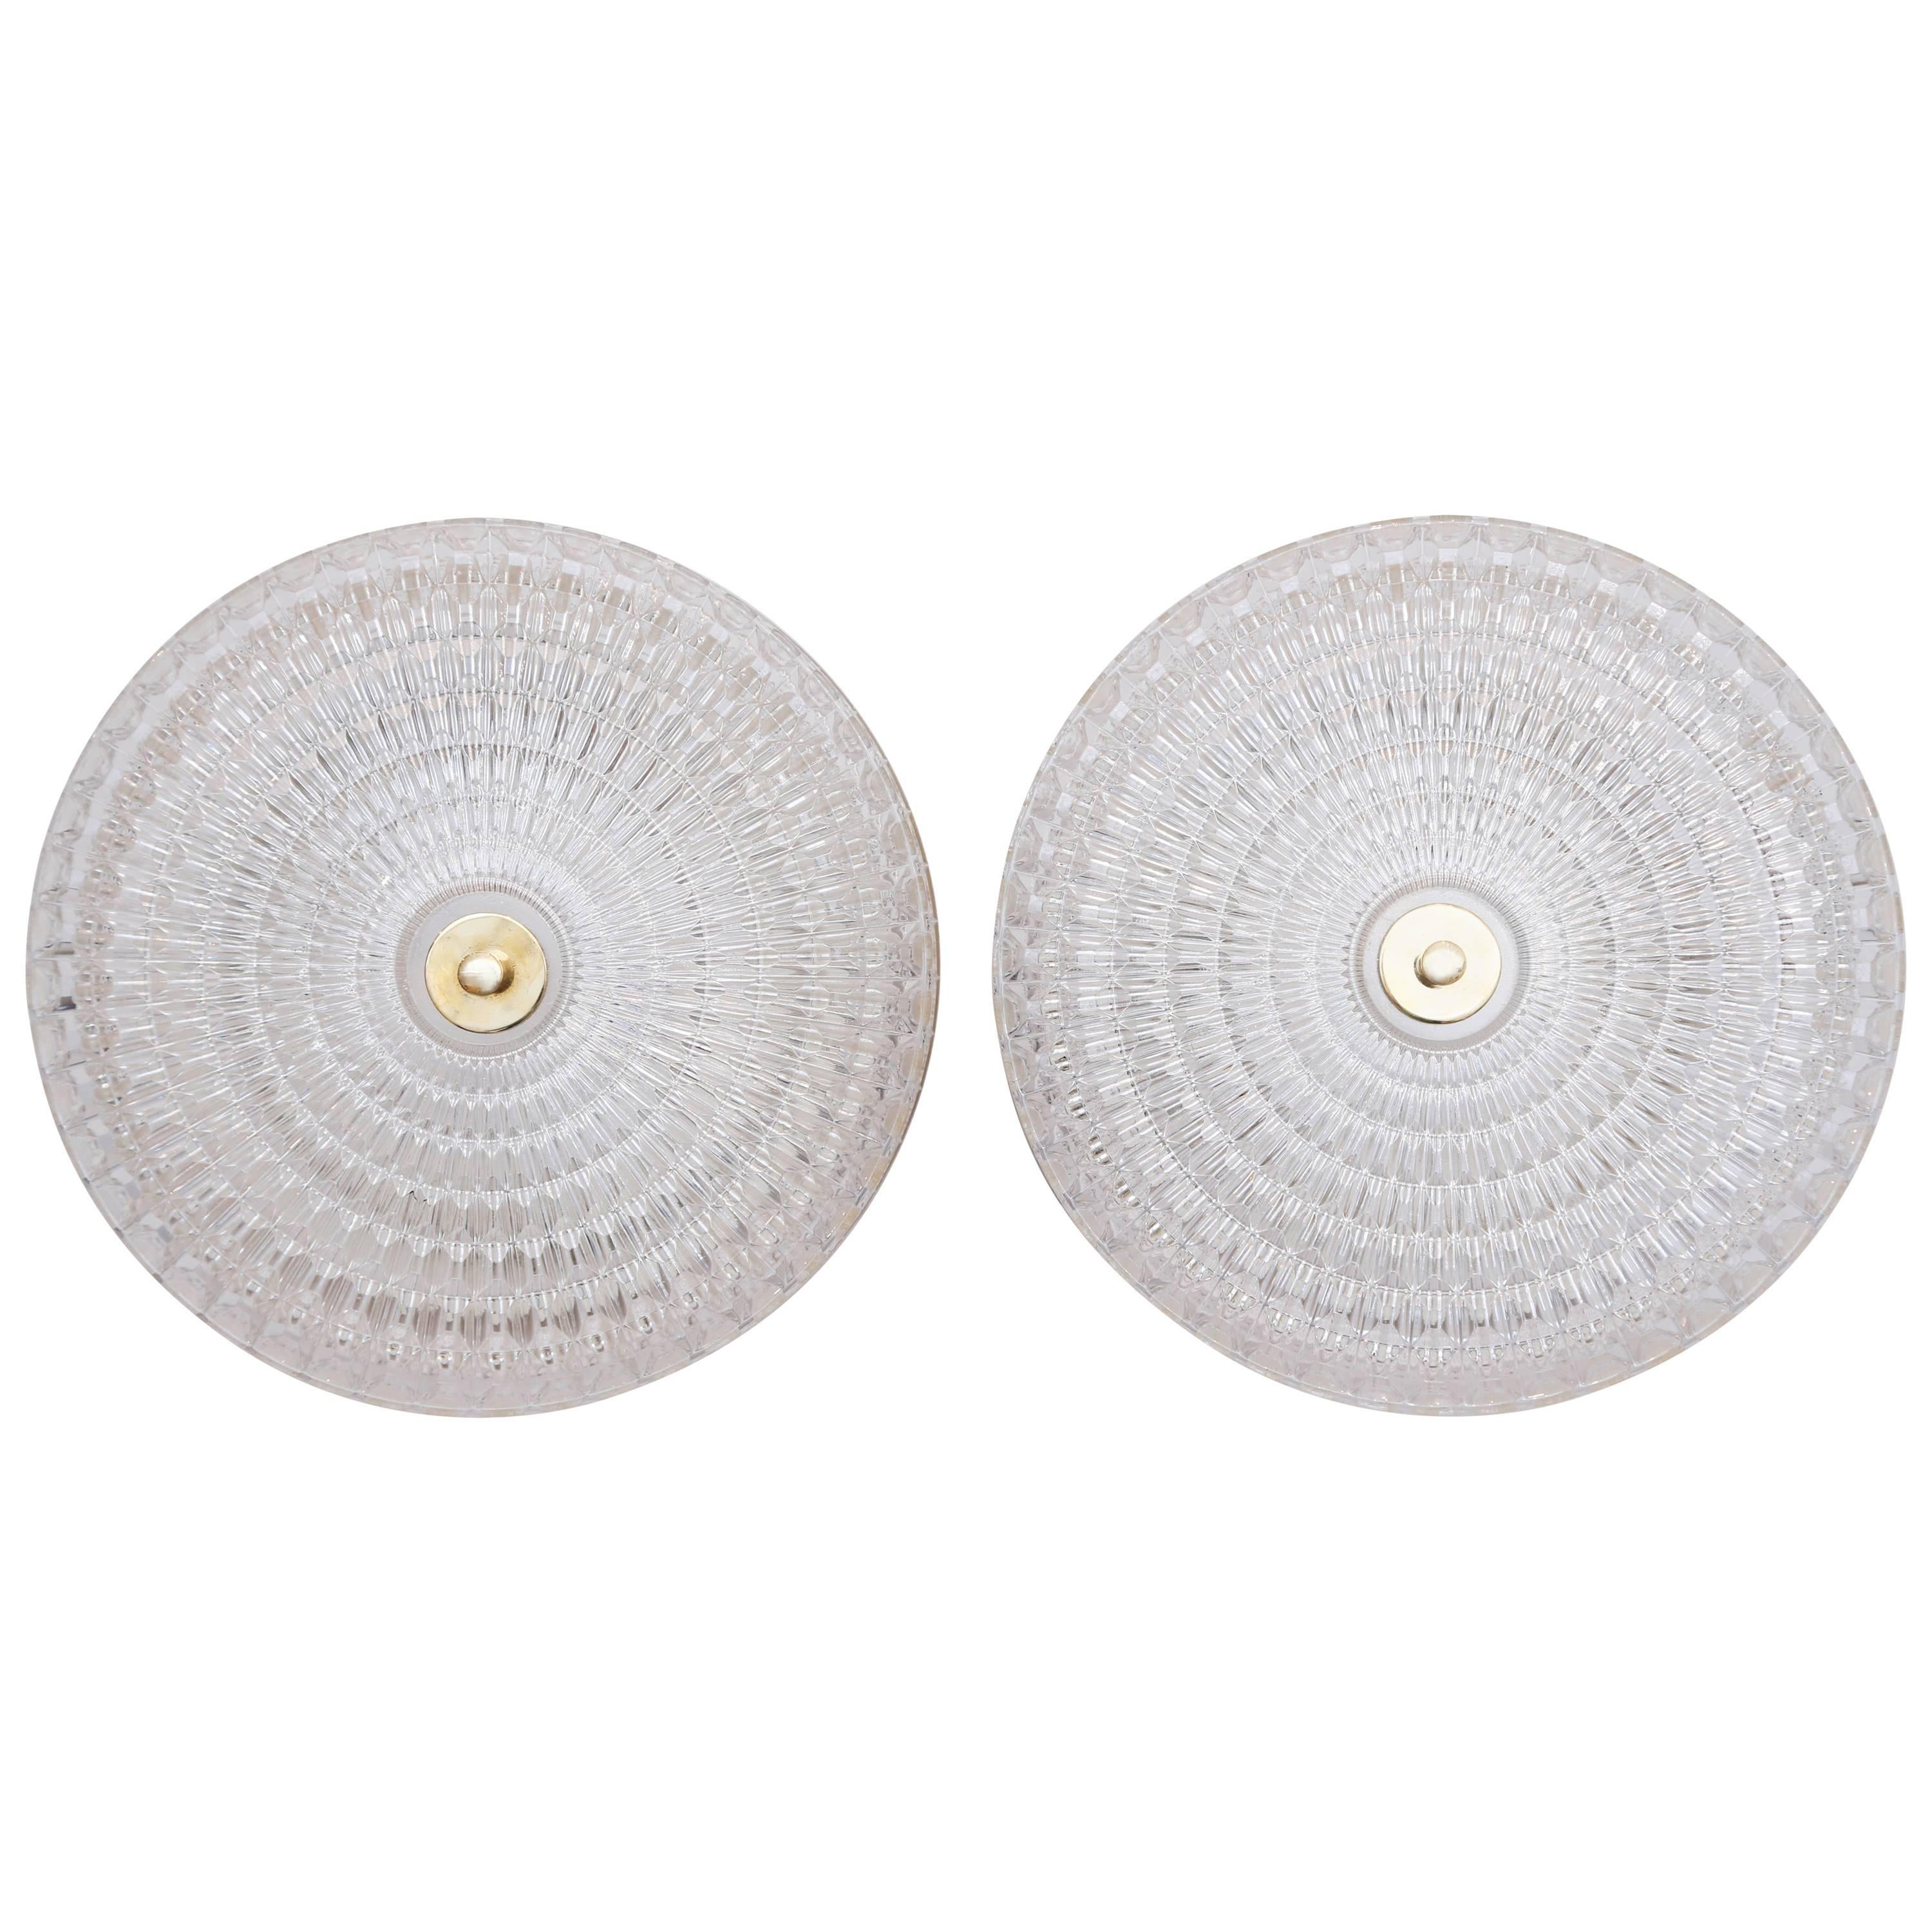 Pair of Carl Fagerlund Flush Mount ceiling lights by Orrefors  Mid 20th century